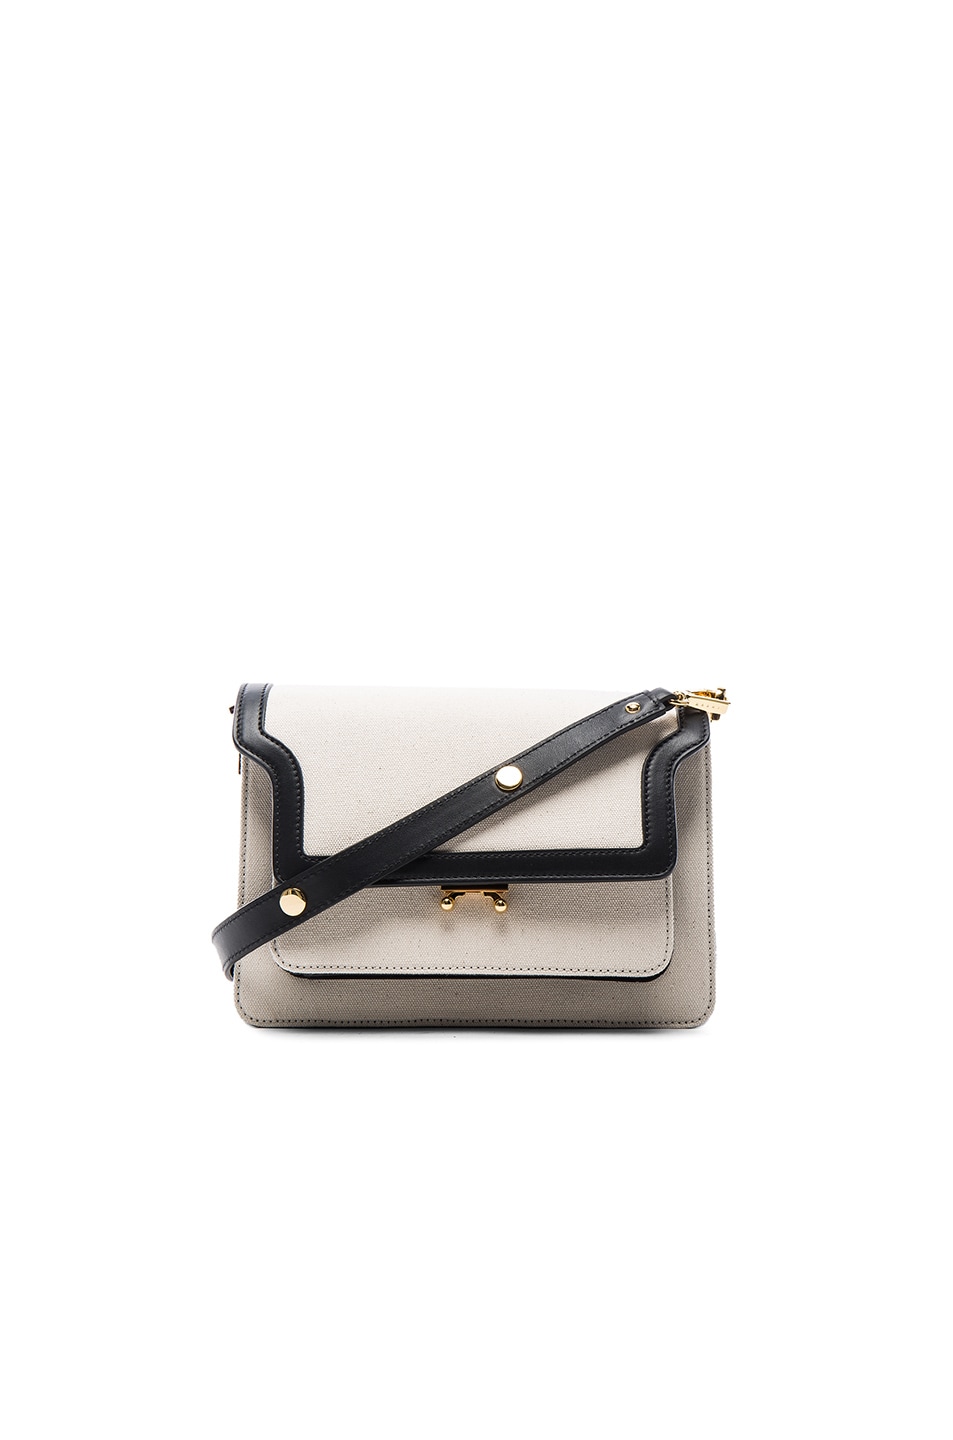 Image 1 of Marni Trunk Bag in Stone White